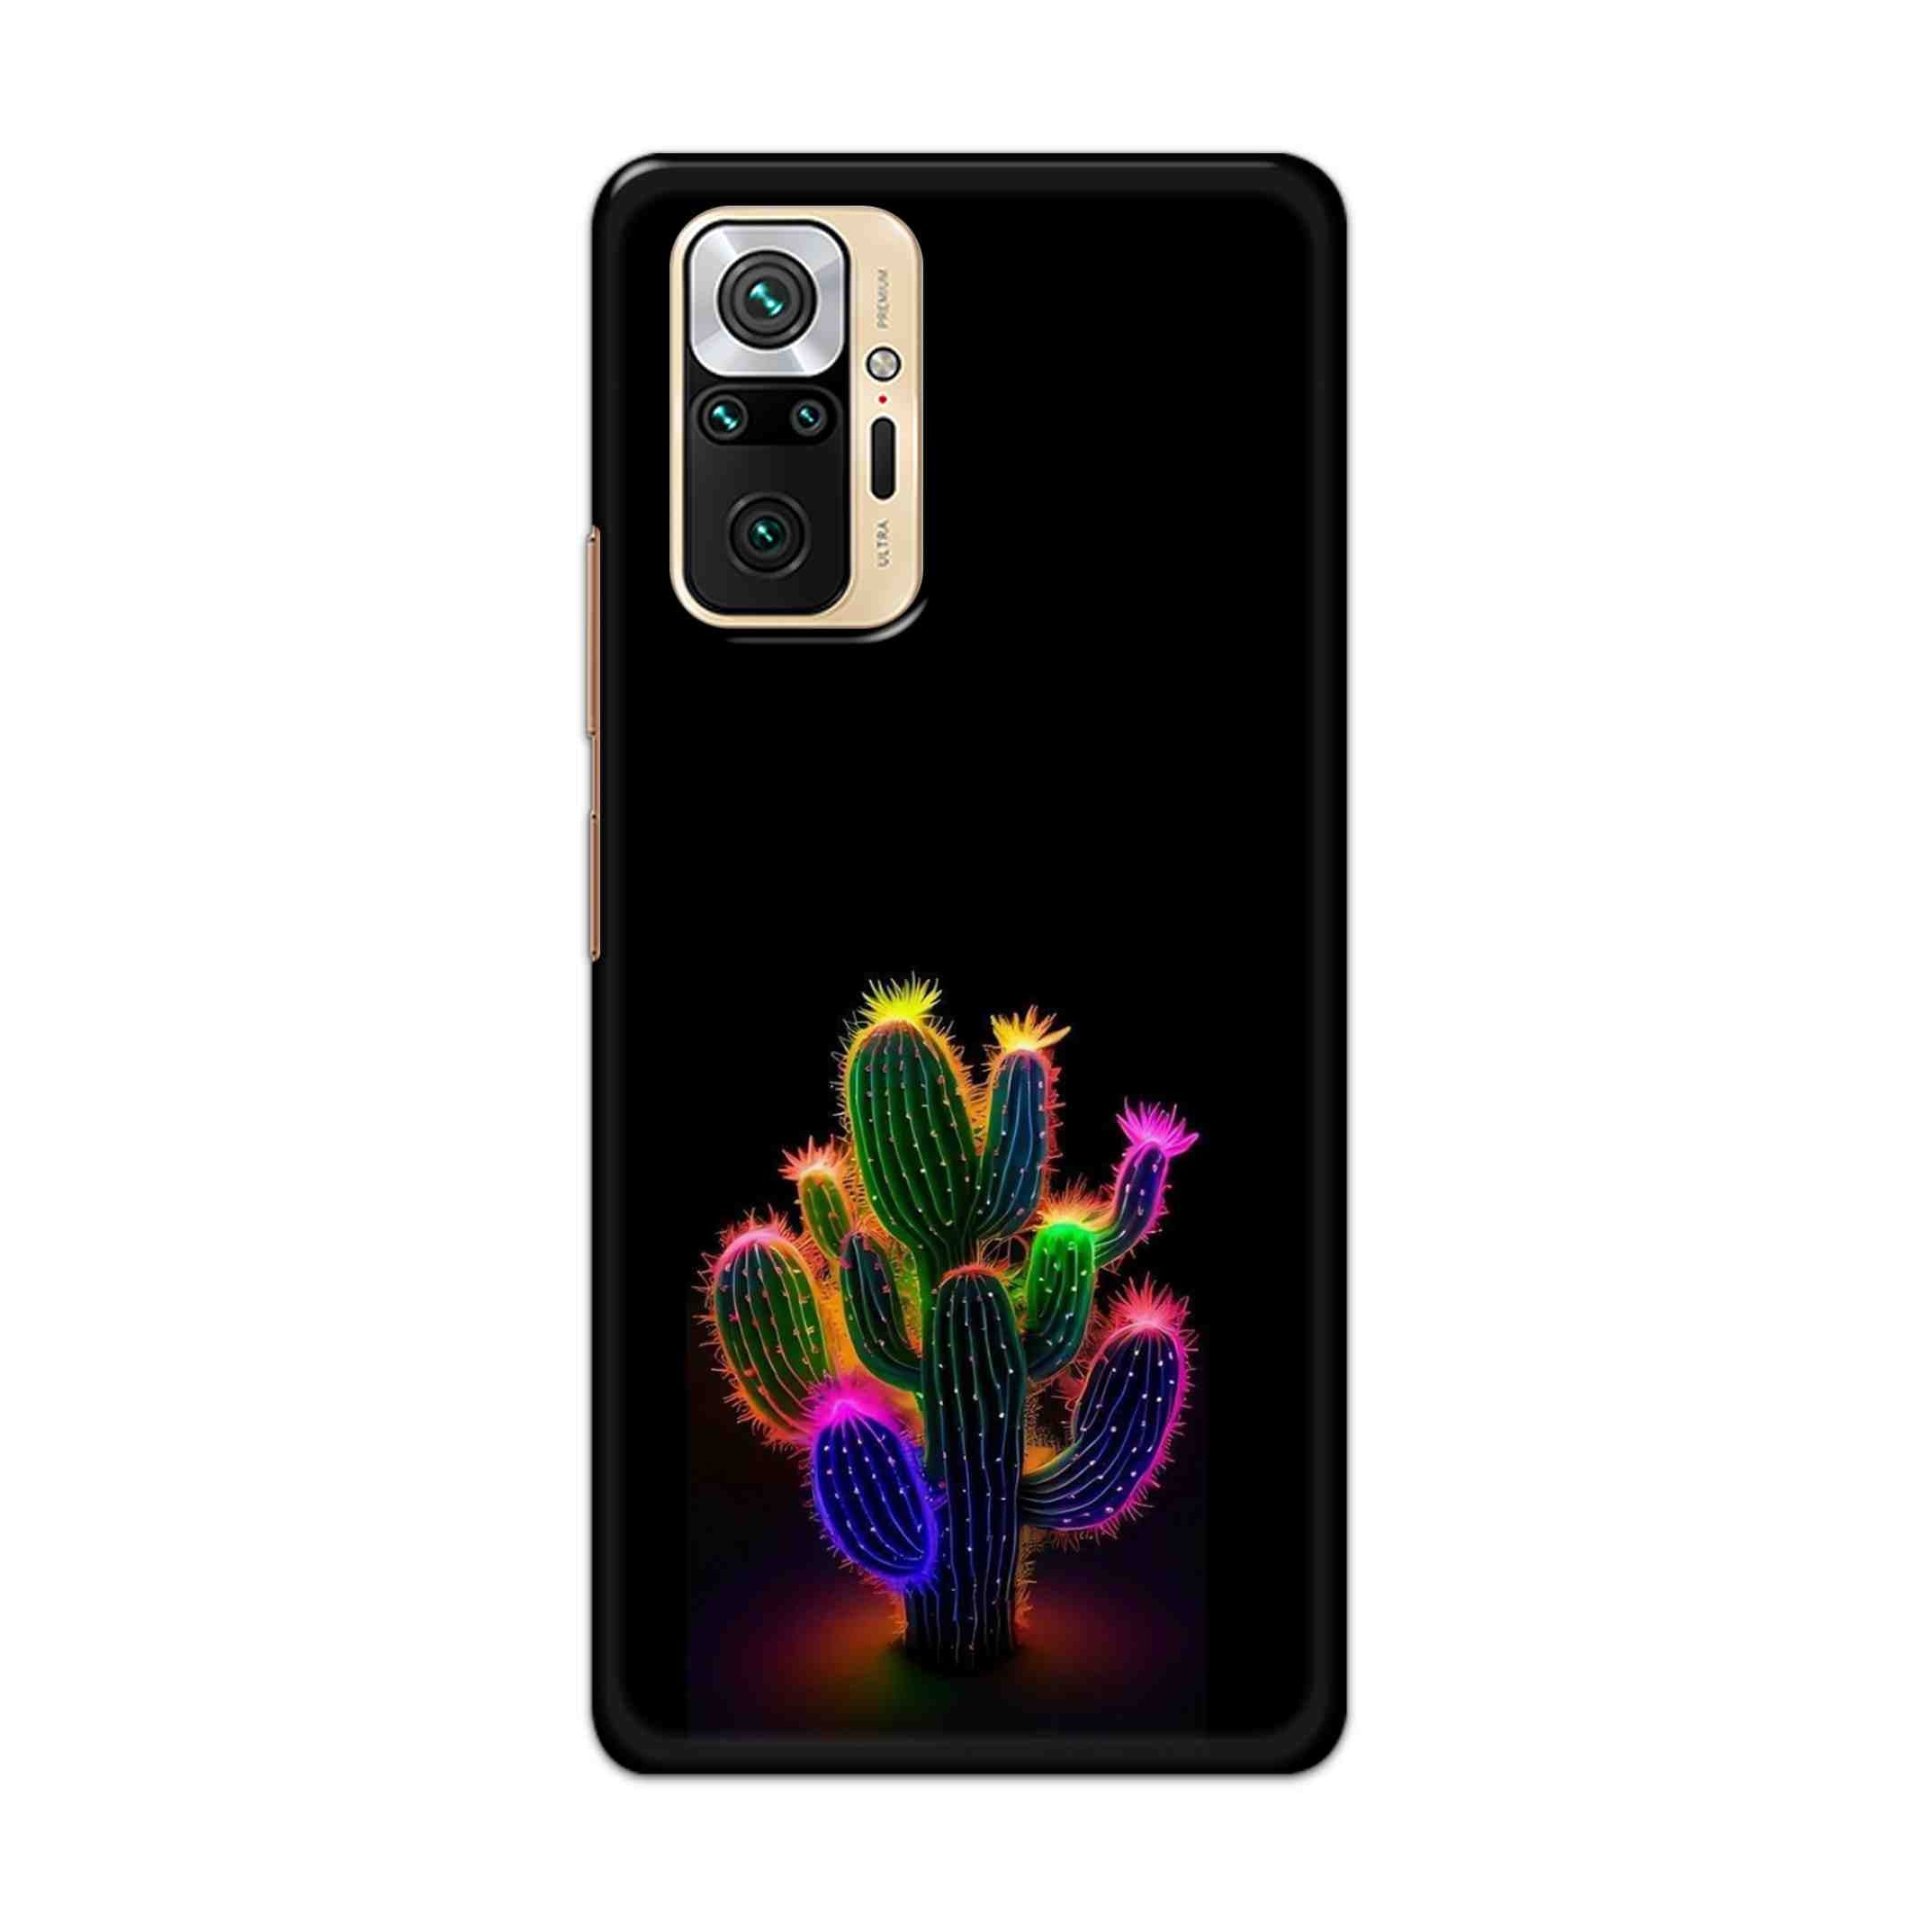 Buy Neon Flower Hard Back Mobile Phone Case Cover For Redmi Note 10 Pro Online